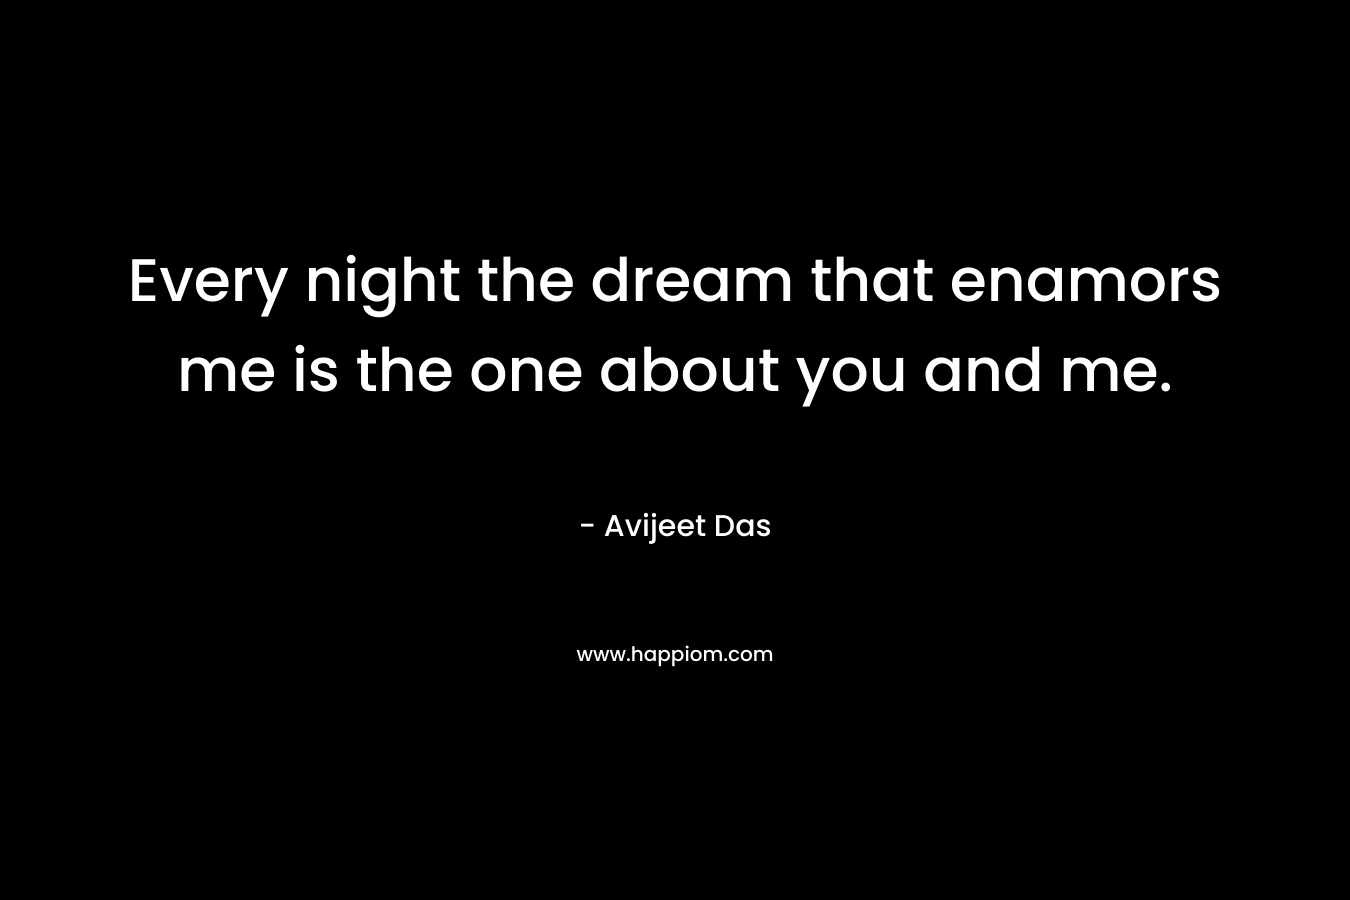 Every night the dream that enamors me is the one about you and me.